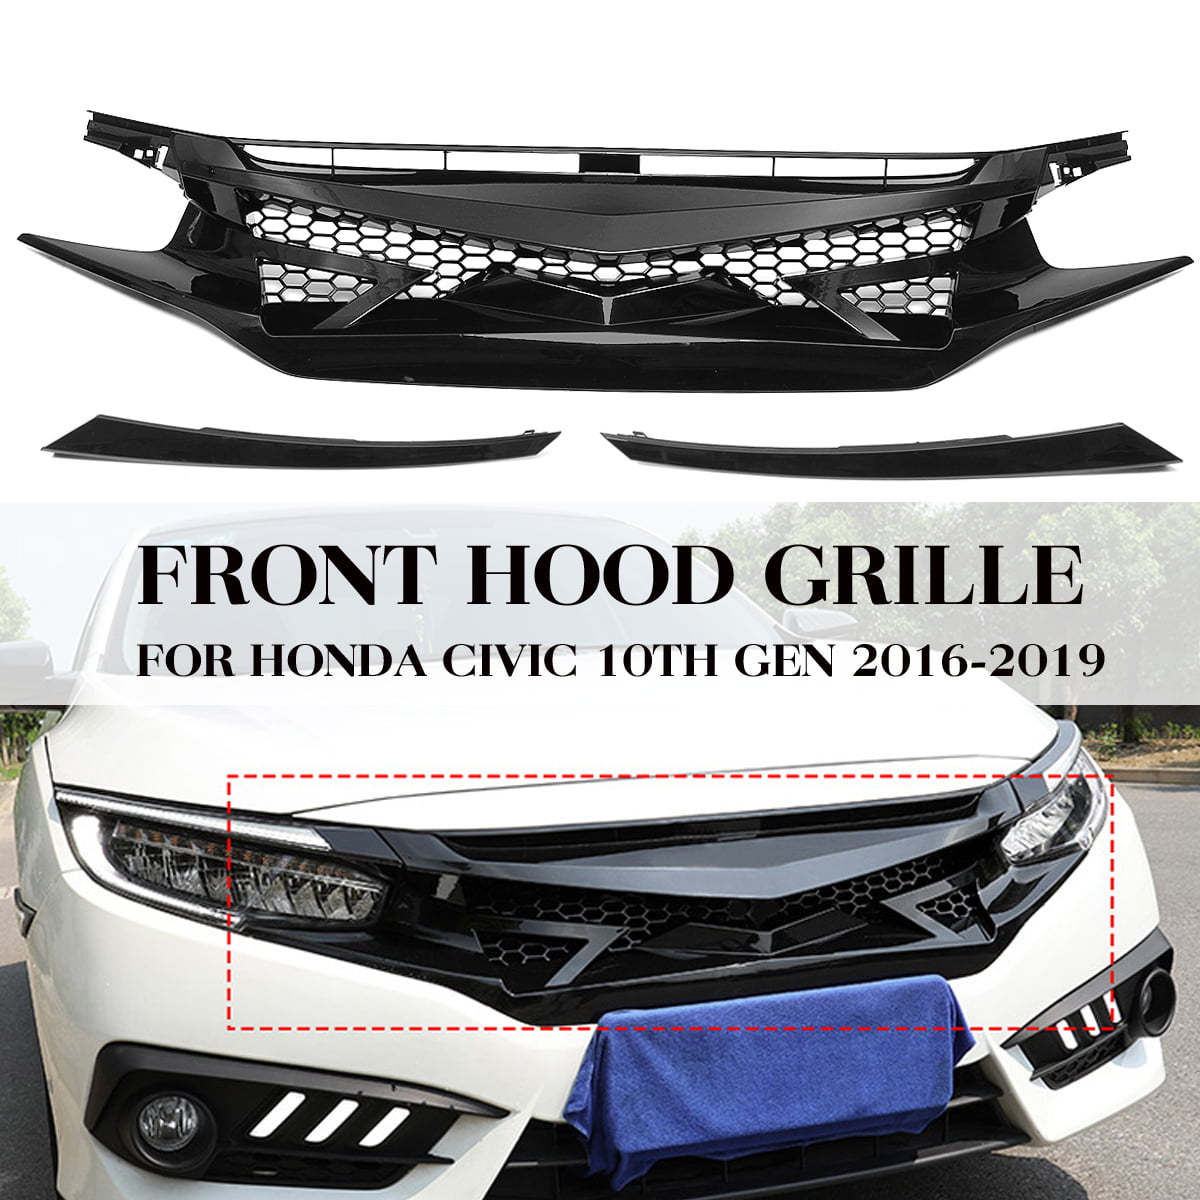 FOR 2016-2019 HONDA CIVIC 10TH GEN GLOSS BLK JDM BATTLE STYLE FRONT HOOD GRILLE